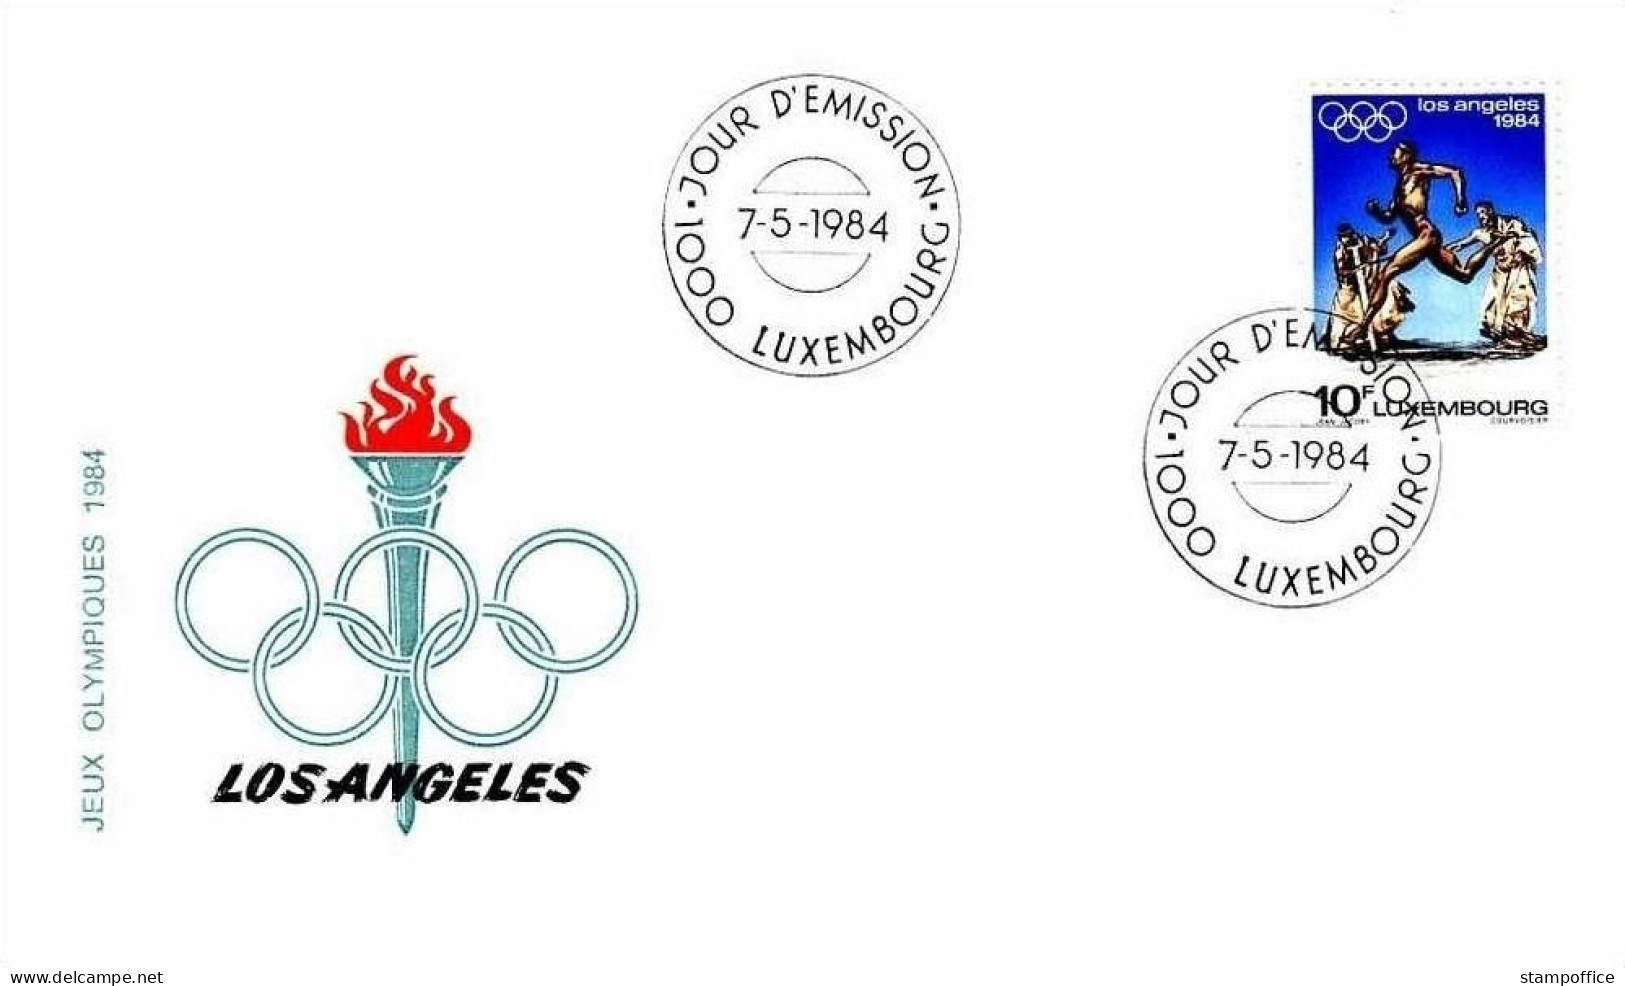 LUXEMBOURG MI-NR. 1104 FDC OLYMPISCHE SOMMERSPIELE LOS ANGELES 1984 - FDC